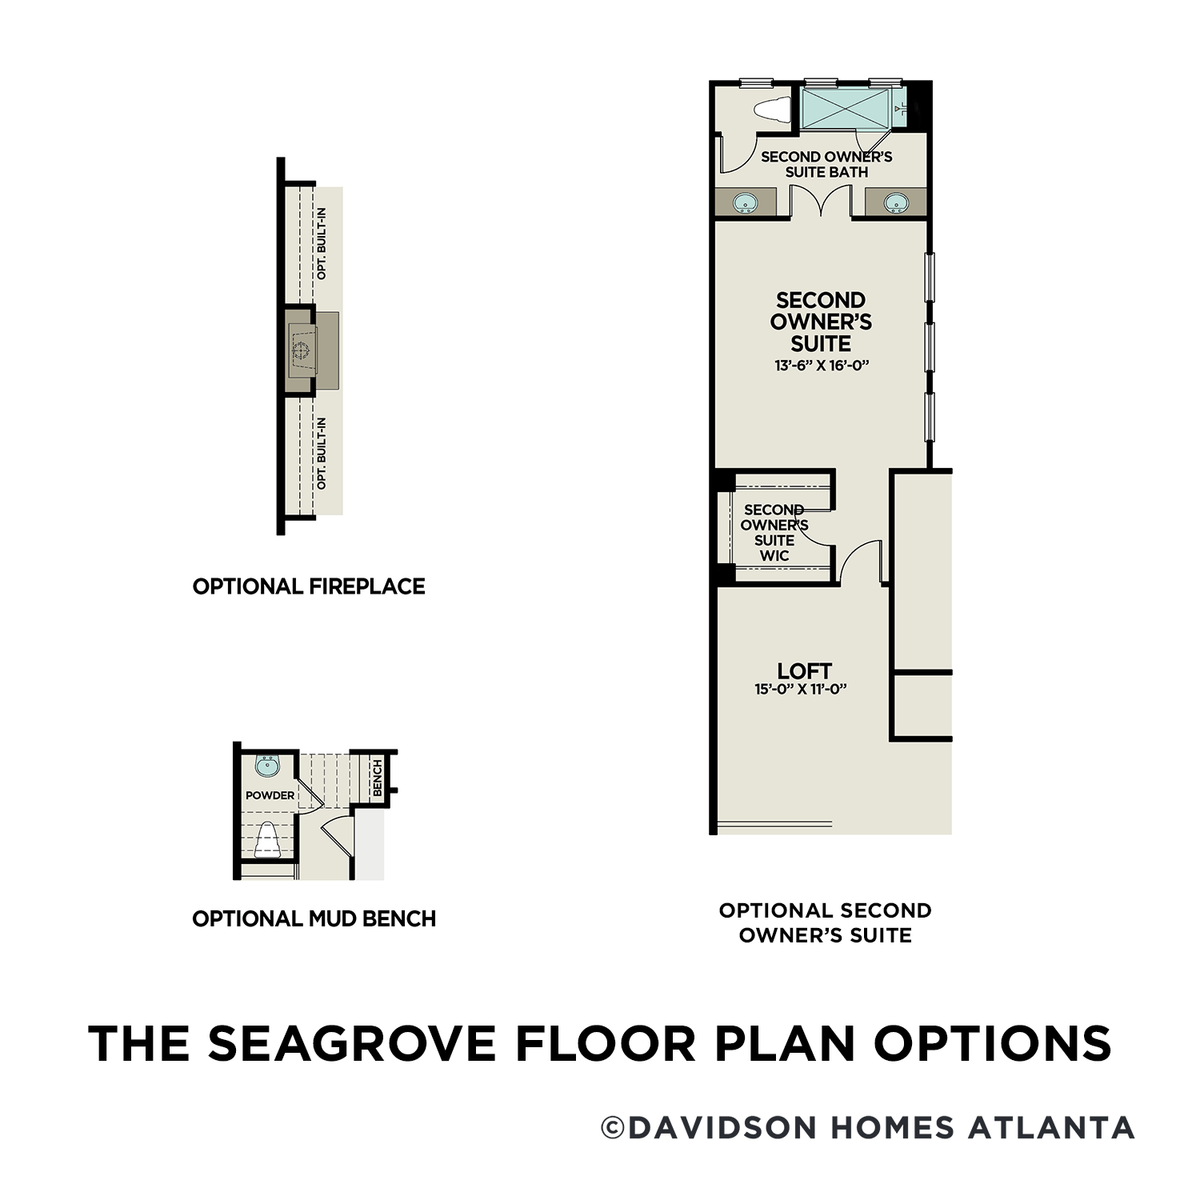 3 - The Seagrove A floor plan layout for 694 Stickley Oak Way in Davidson Homes' The Village at Towne Lake community.